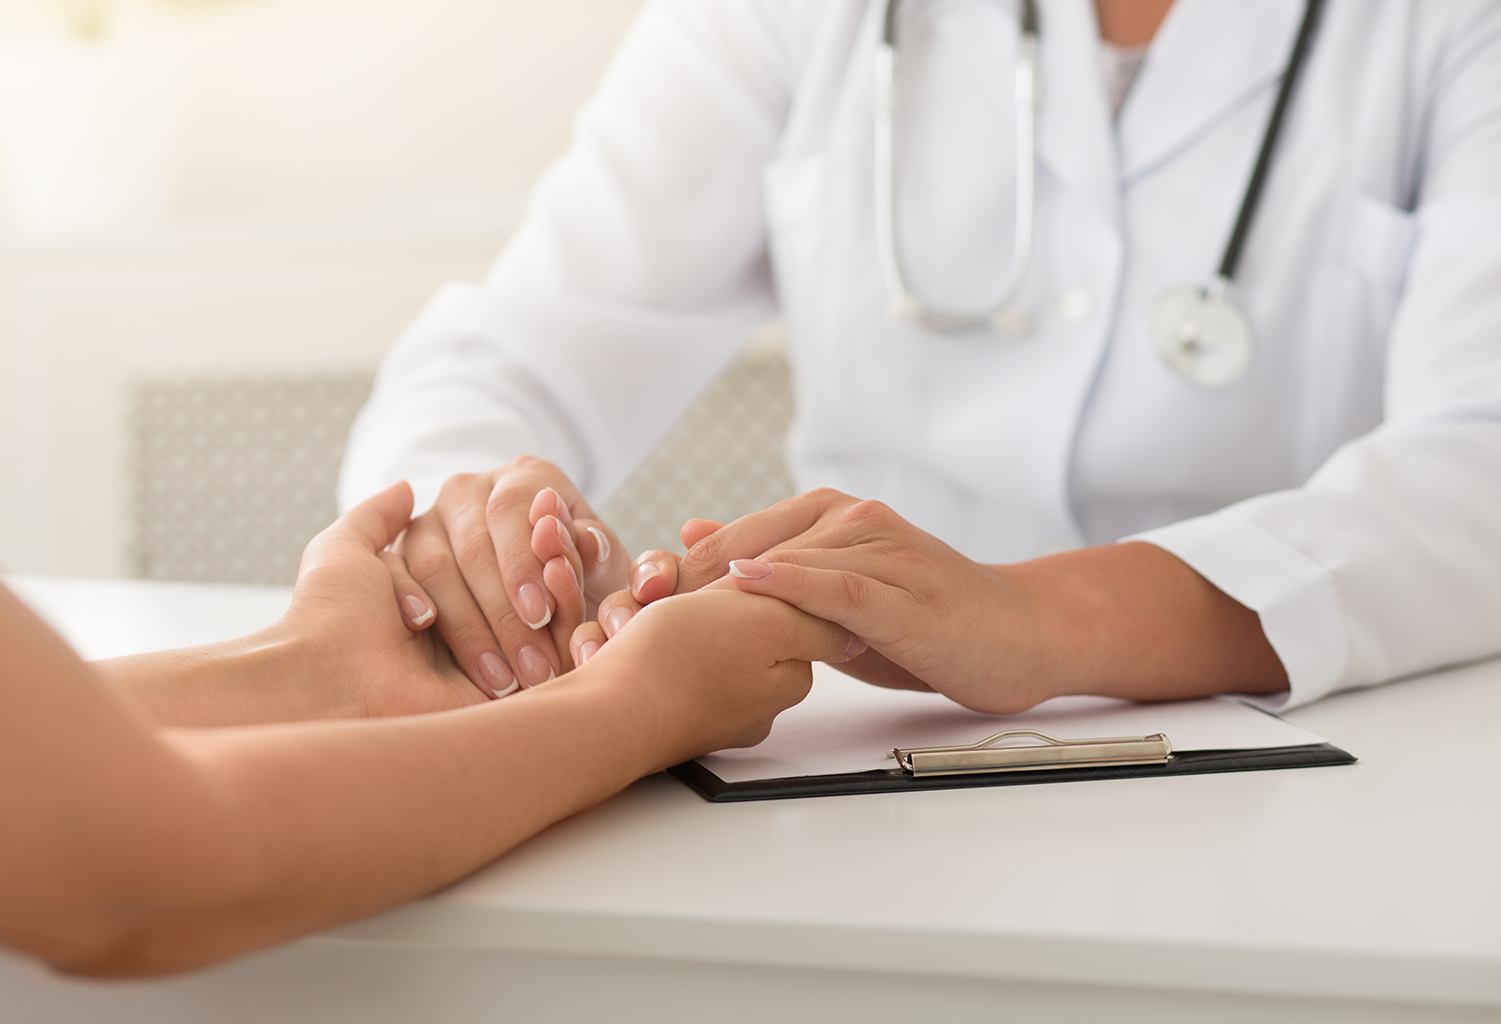 How Compassion Can Improve Patient Treatment Adherence